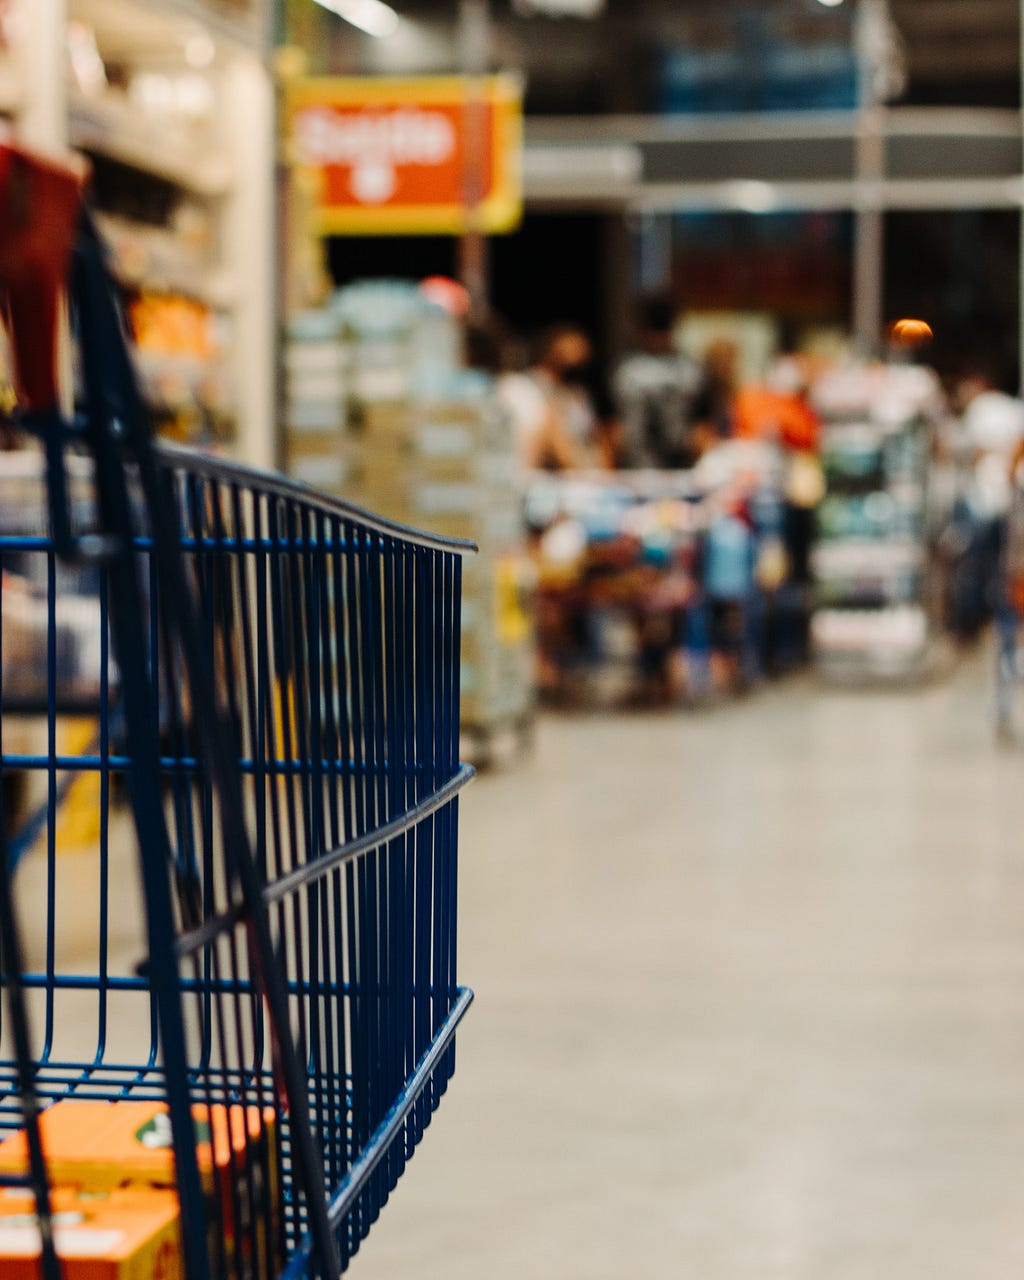 A close up picture of a blue shopping cart making it’s way to the check out aisle. The check out aisle in the background is blurred.